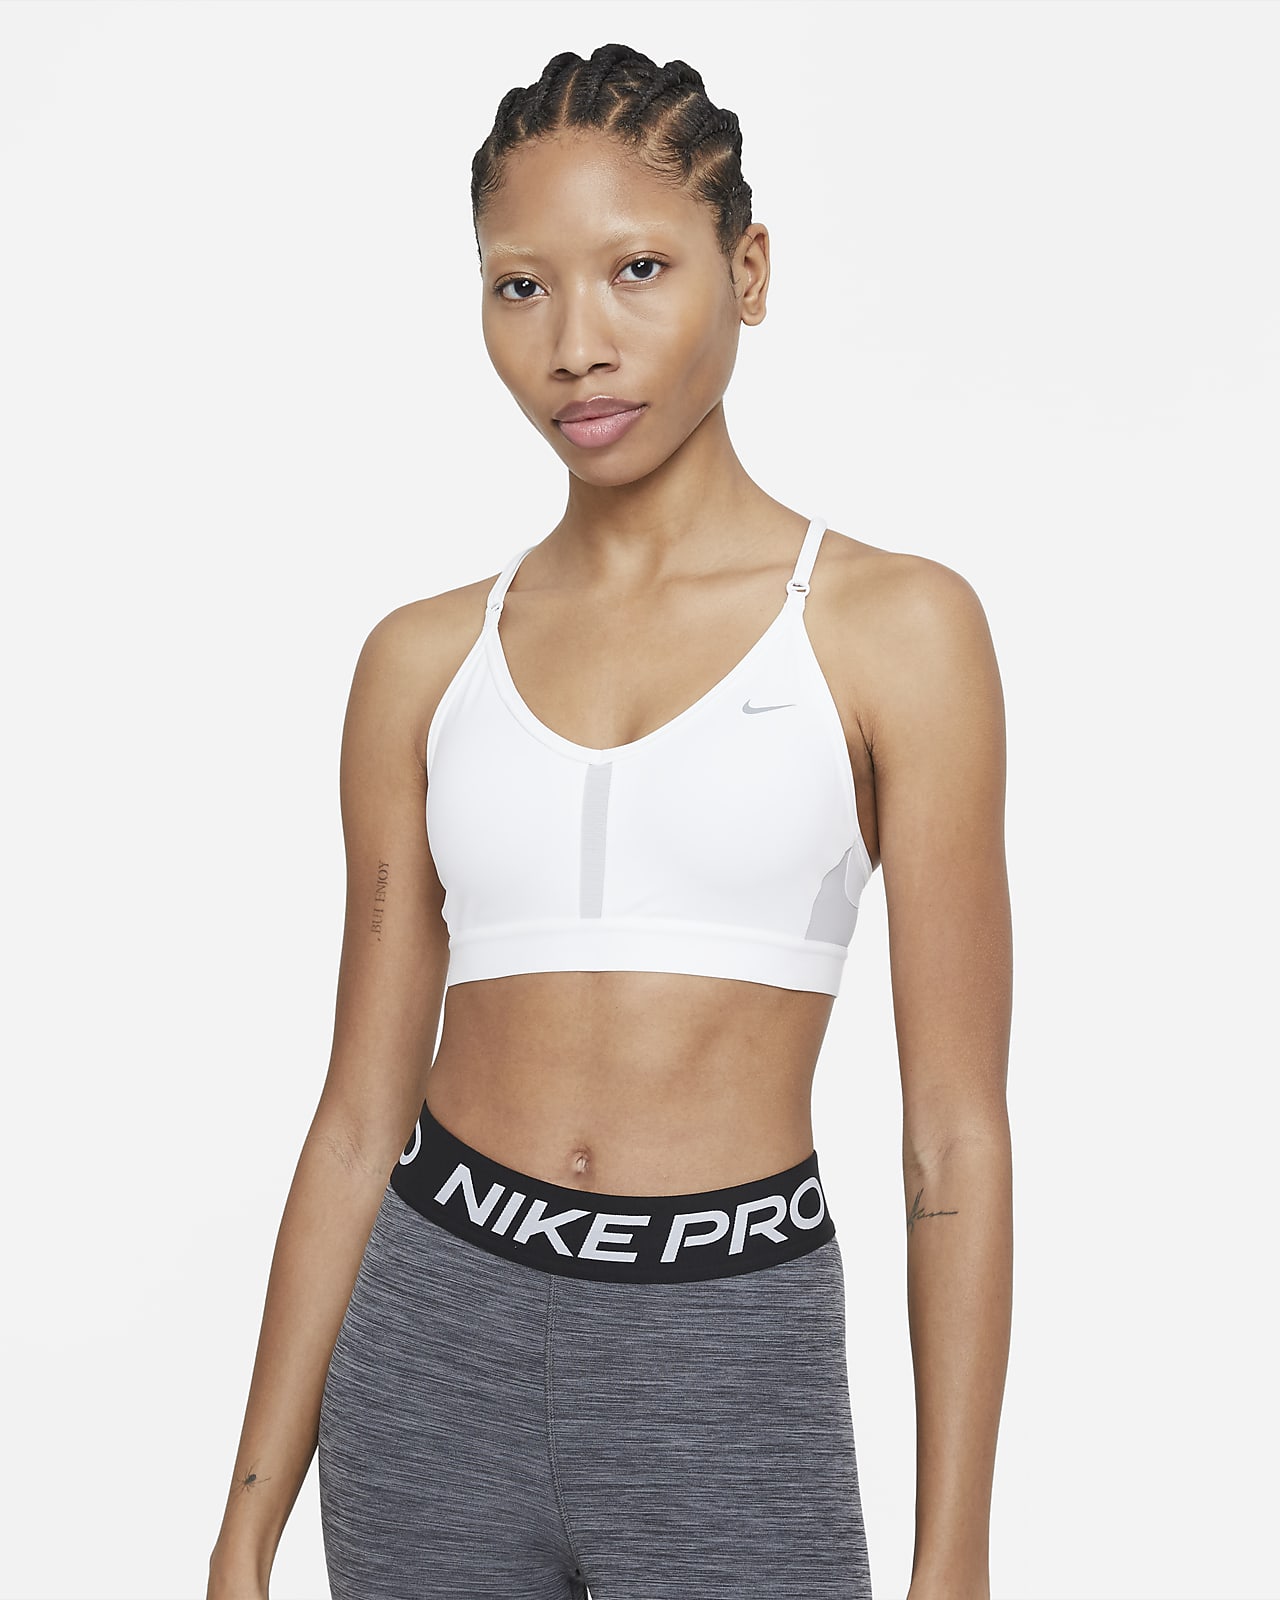 Intolerable Dictado Respecto a Nike Indy Women's Light-Support Padded V-Neck Sports Bra. Nike.com